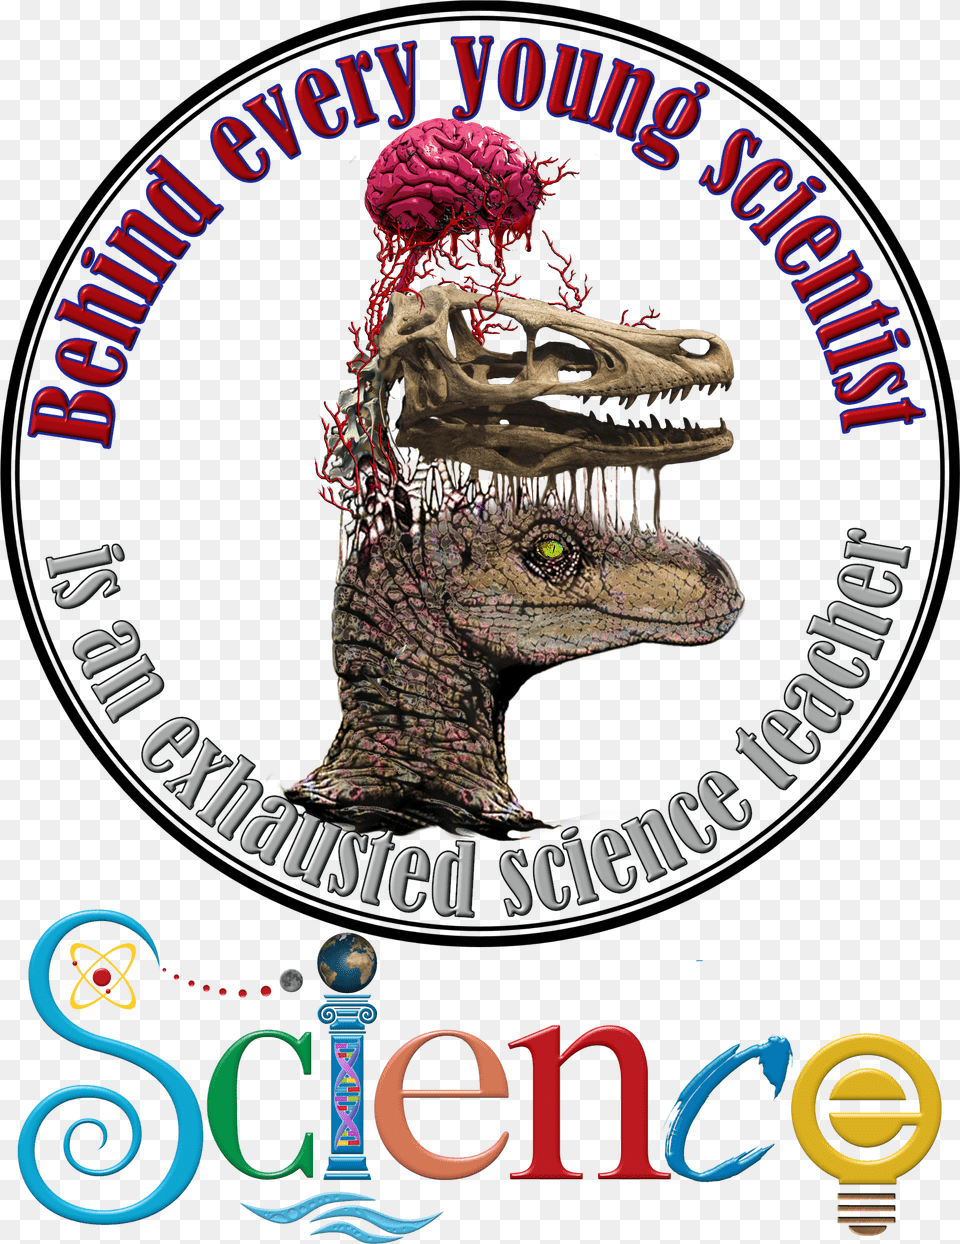 Every Young Scientist Dino Michigan Science Center Free Transparent Png